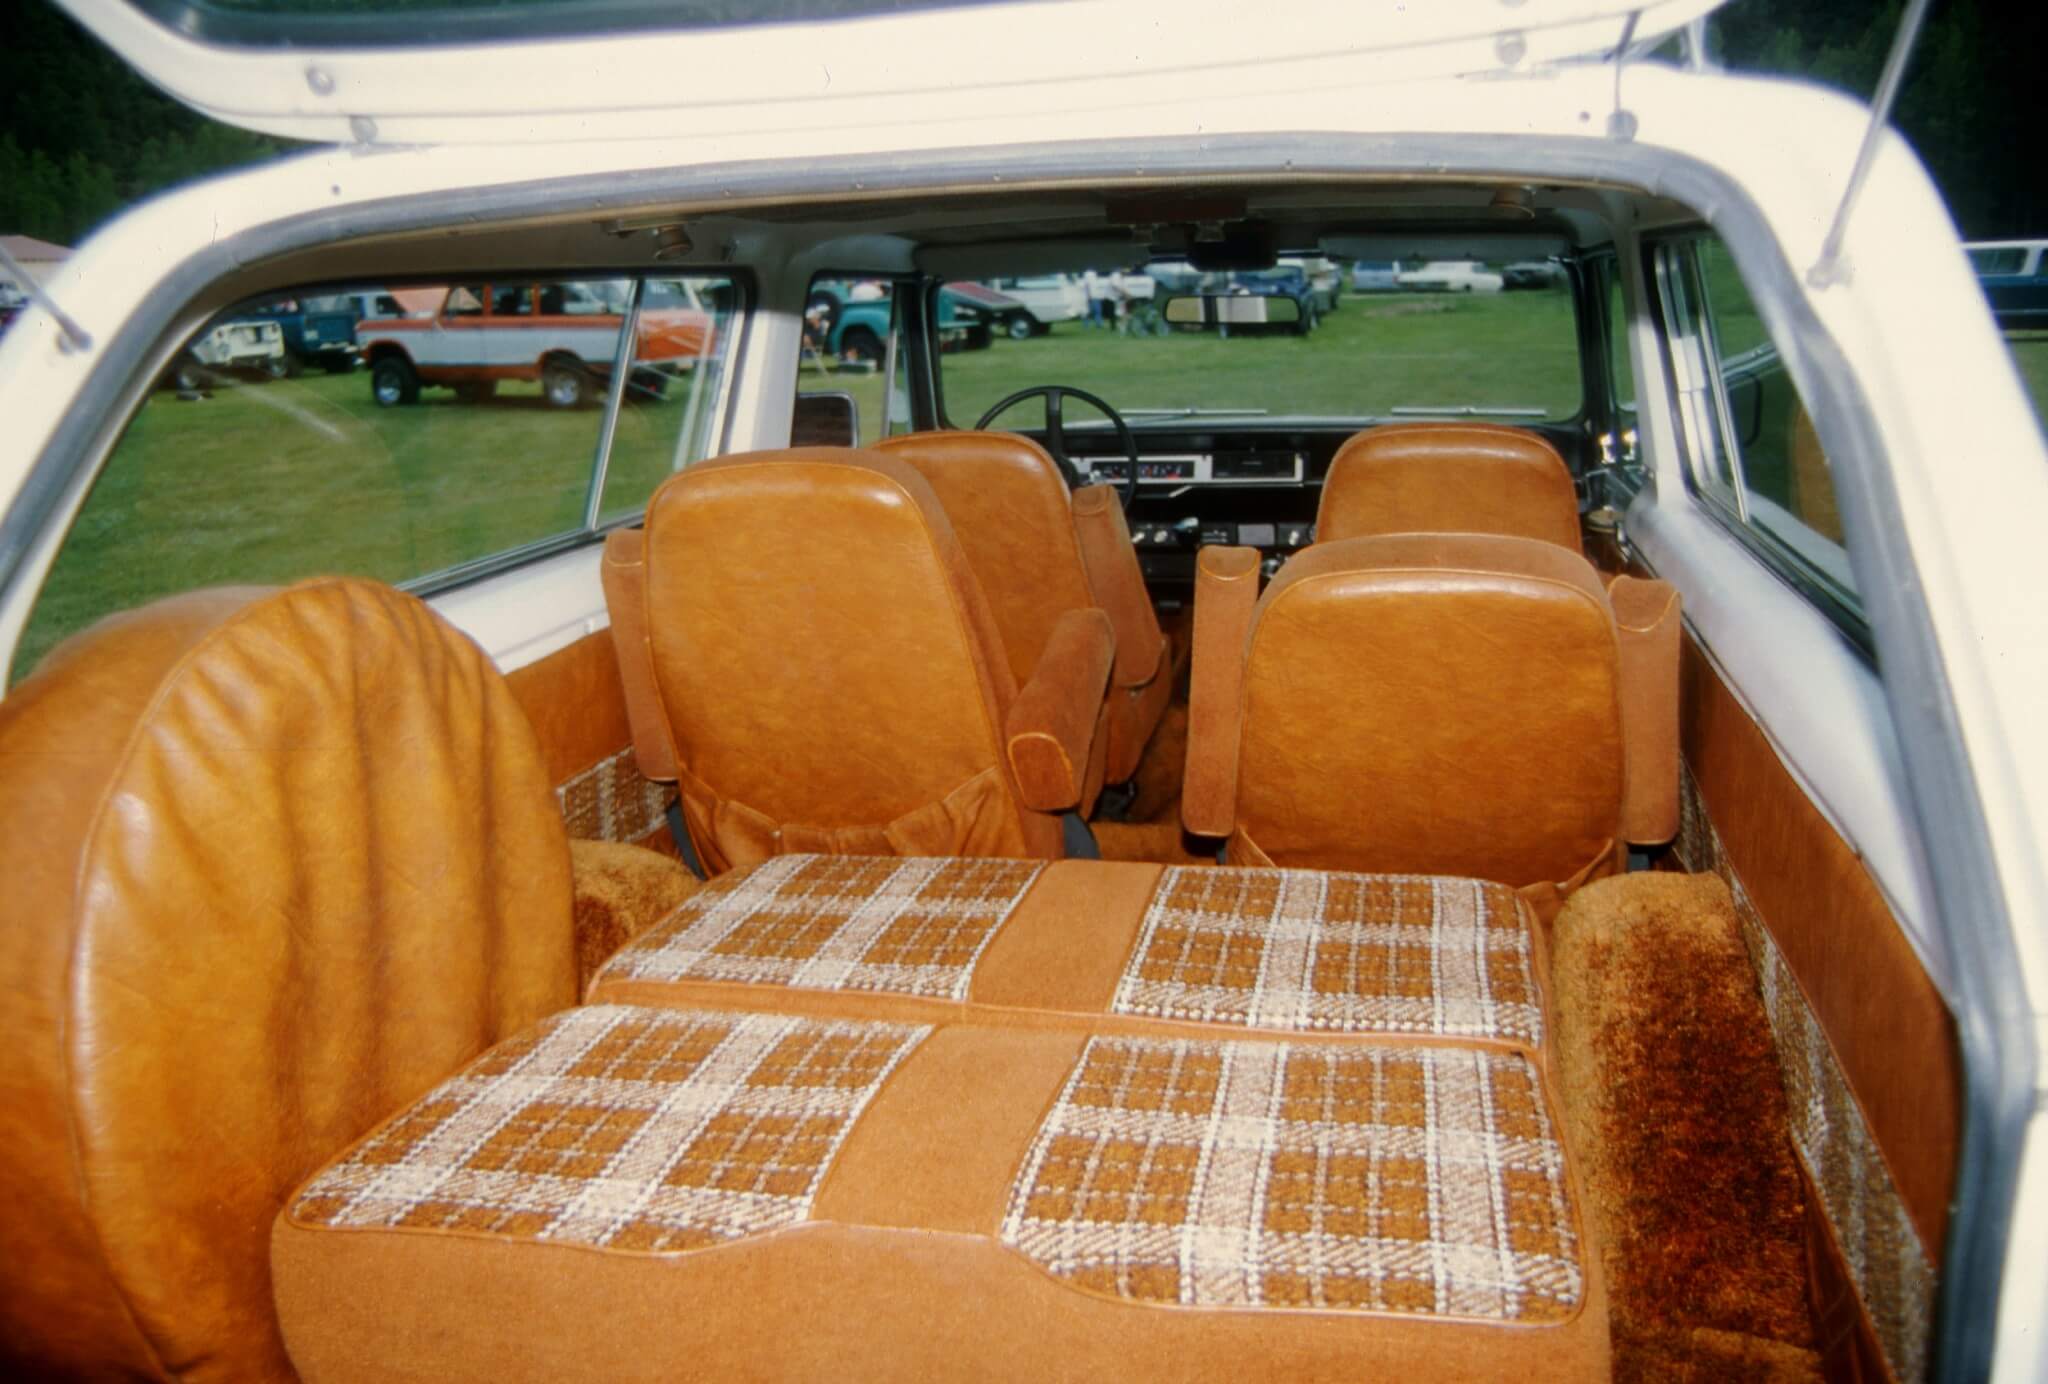 If you wanted a “travelin’” interior in your Traveler, you ordered the Midas Package. Travelers so ordered went from the Ford Wayne factory to Elkhart, where Midas installed swiveling captains chairs up front and plush buckets in back. An optional third-row seat folded down into a comfortable bed.